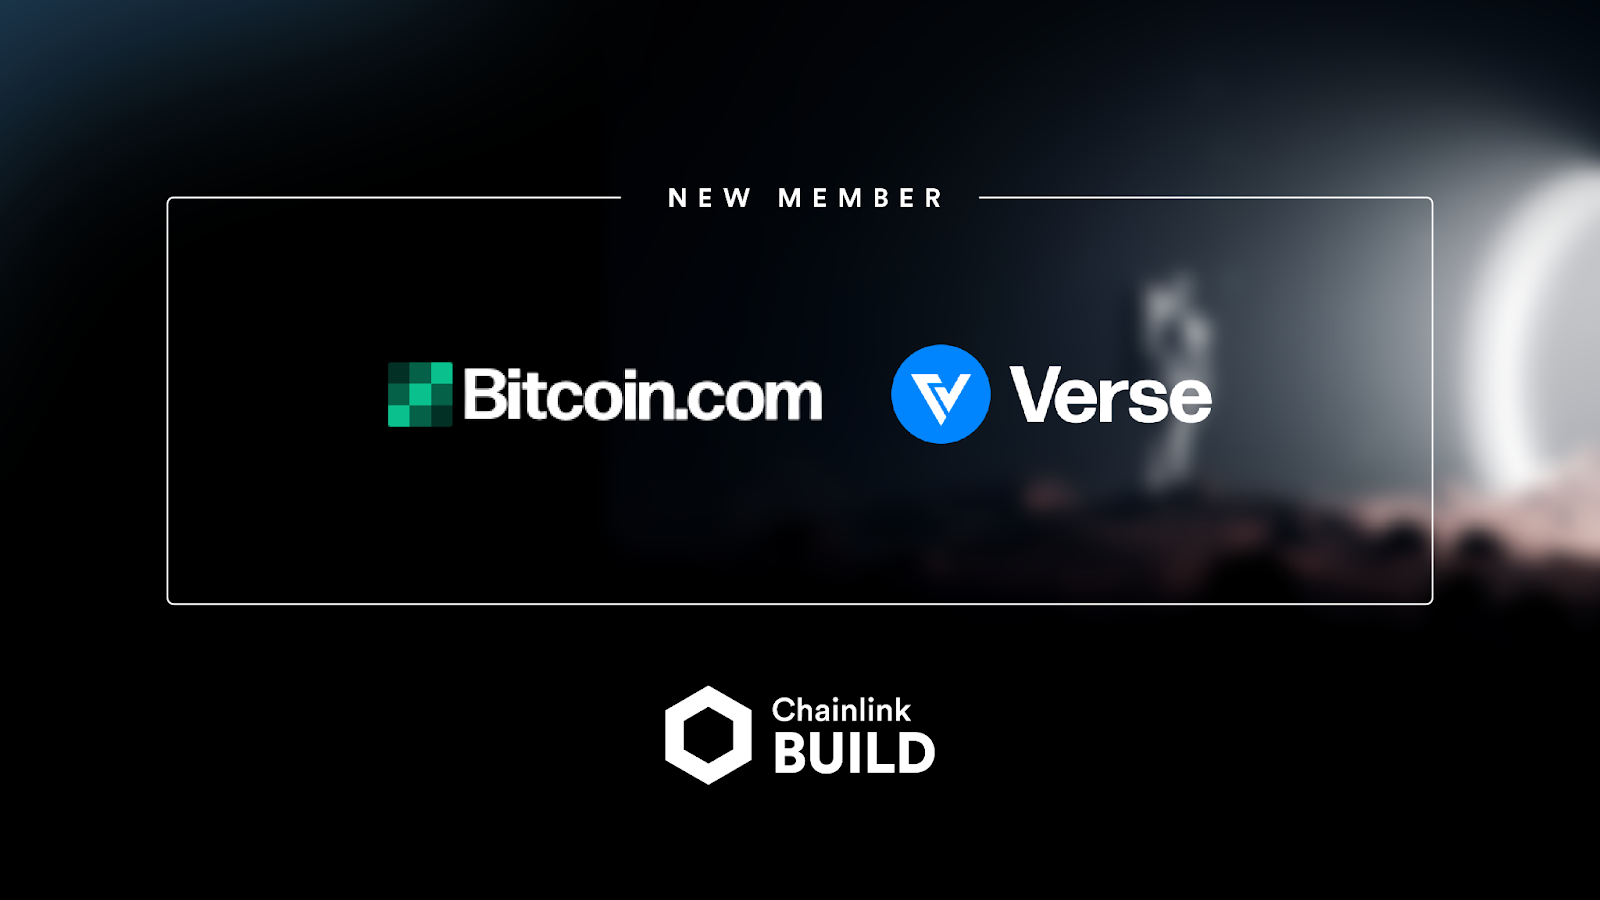 Bitcoin․com Joins Chainlink BUILD to Boost Adoption of VERSE Ecosystem dApps – Press release Bitcoin News